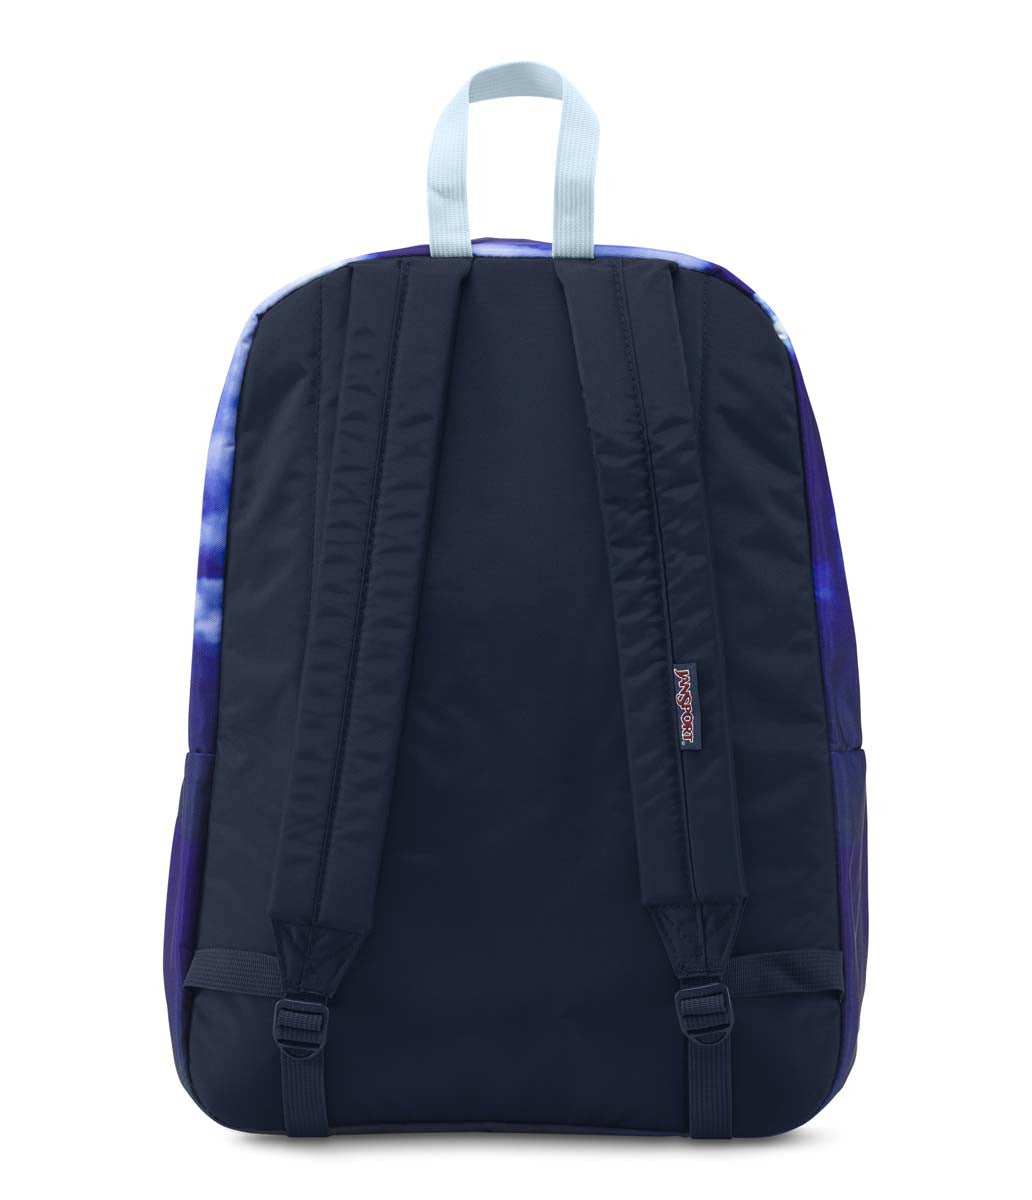 JanSport High Stakes Backpack - Cheetah JCRS7-ZS3